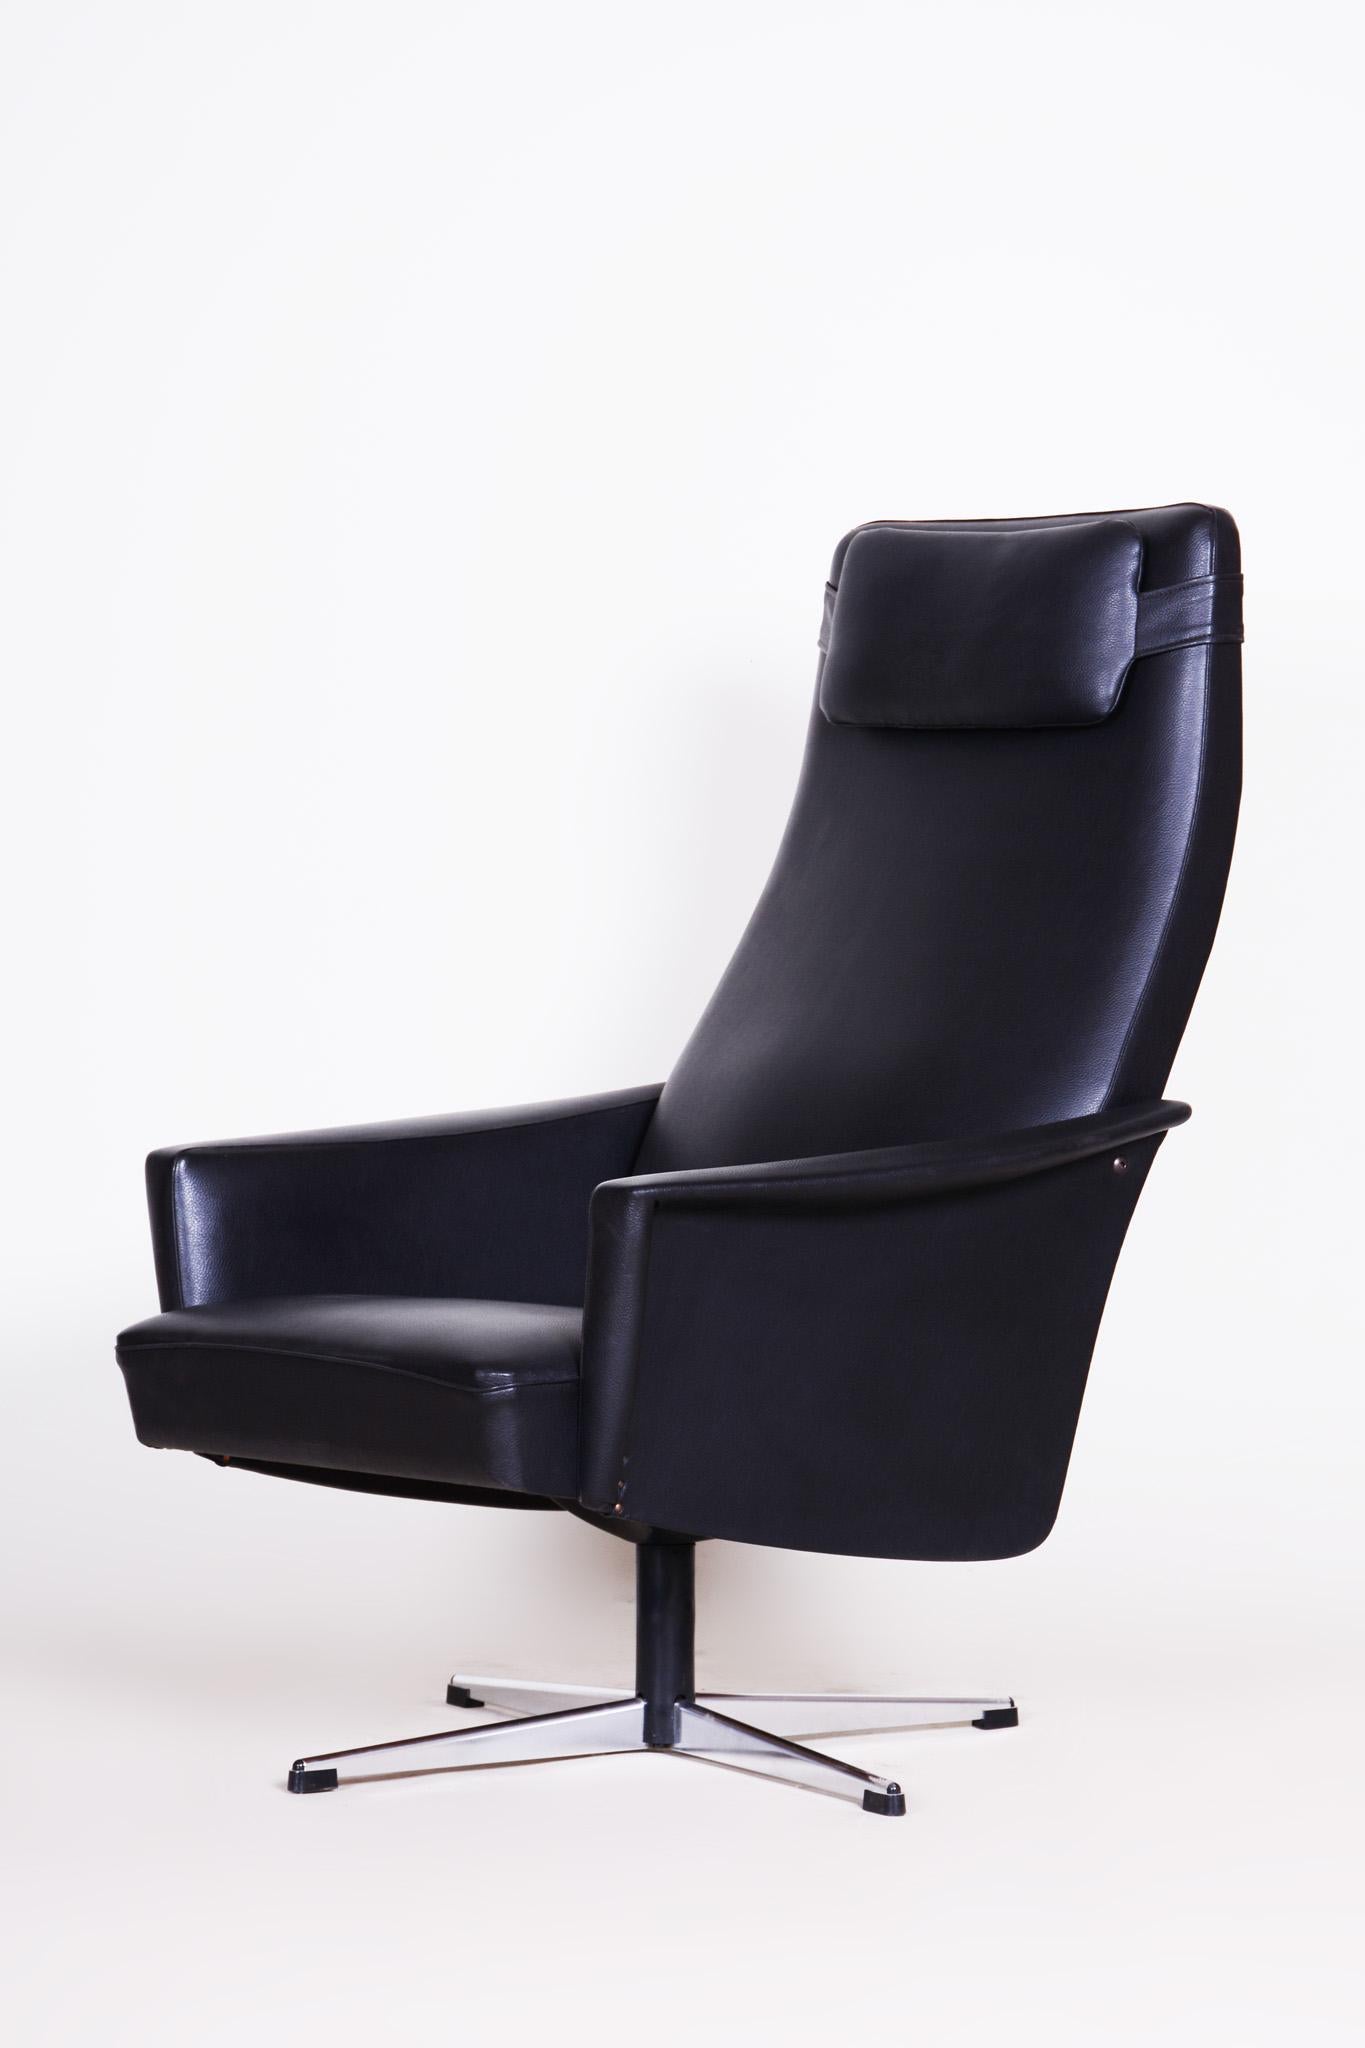 Mid-Century Modern Black Faux Leather Armchair, 1960s, Original Well Preserved Condition, Czechia For Sale